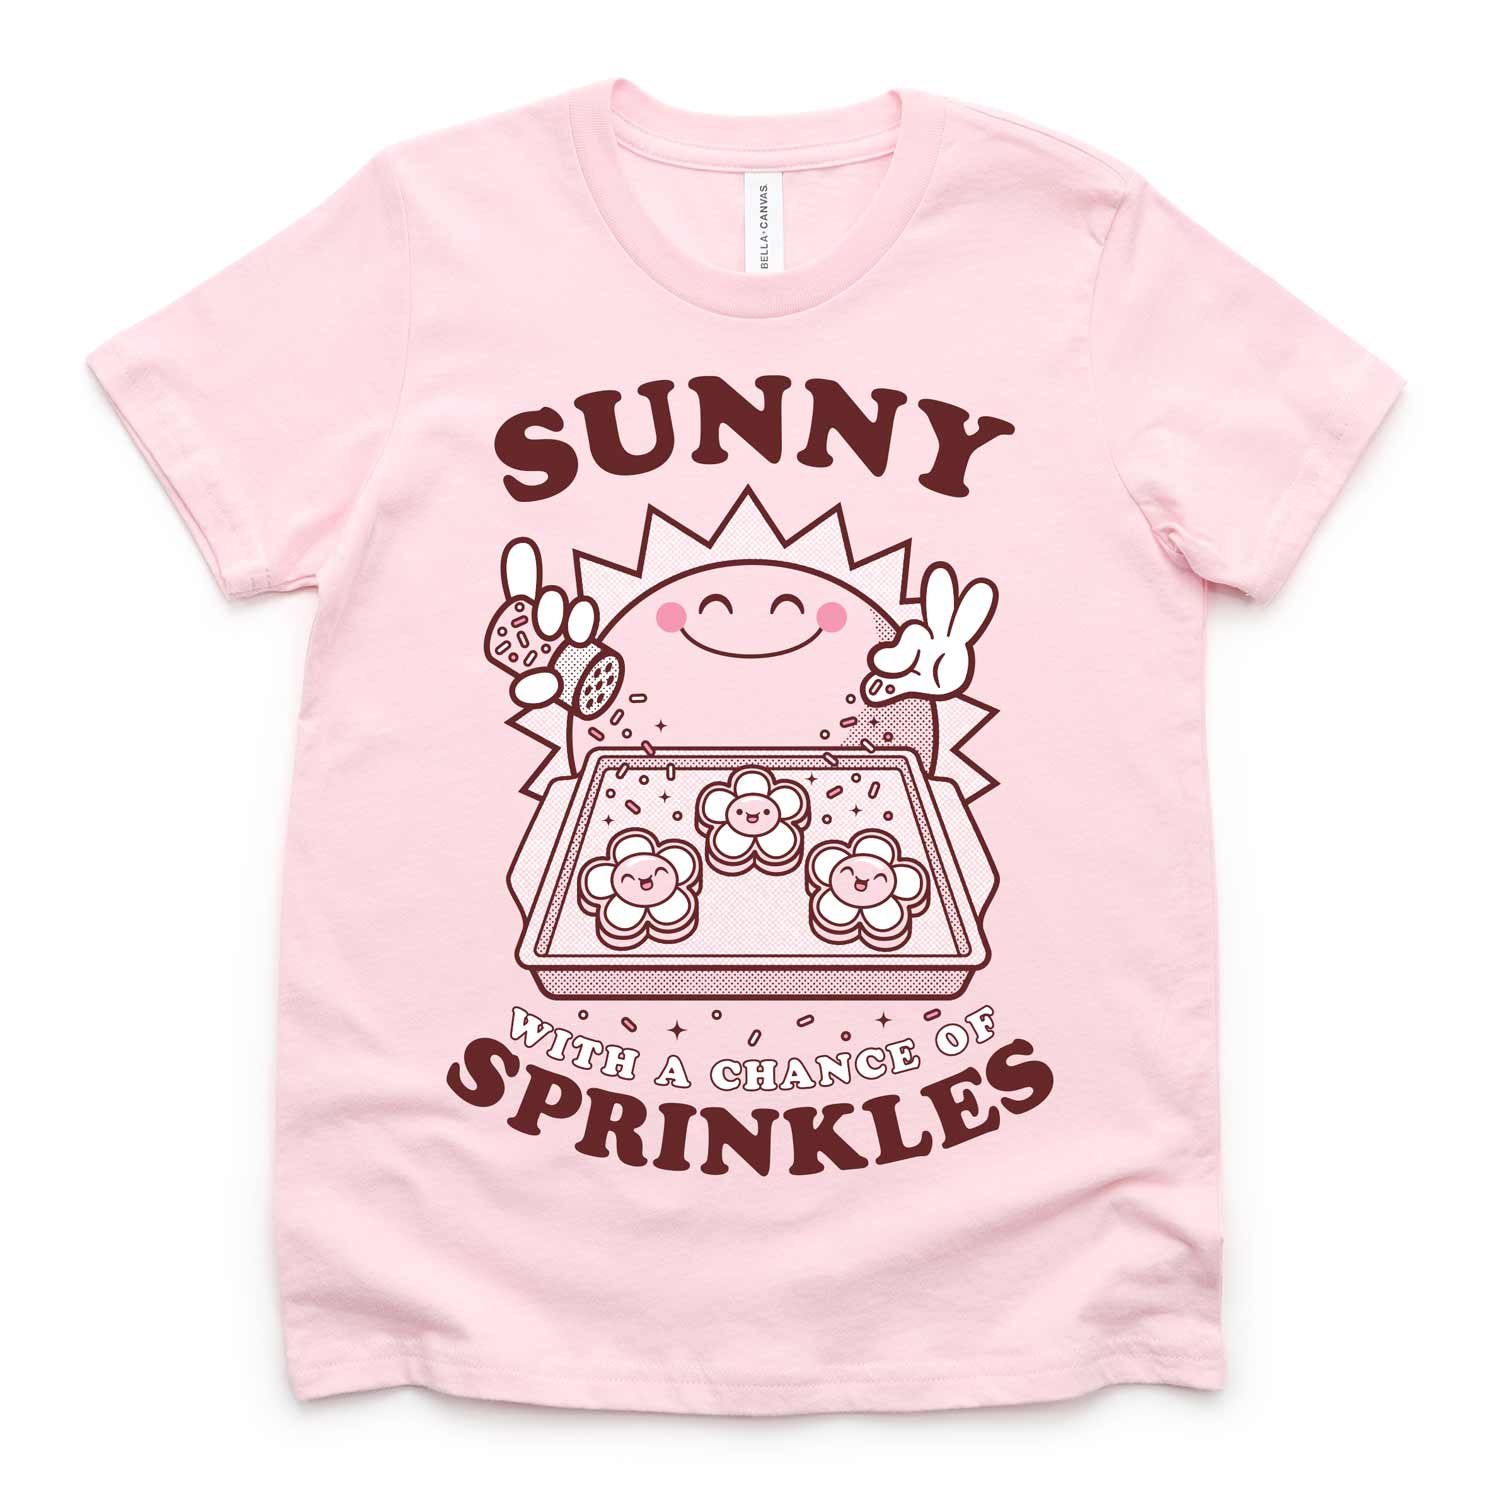 Sunny with a Chance of Sprinkles Youth T-Shirt